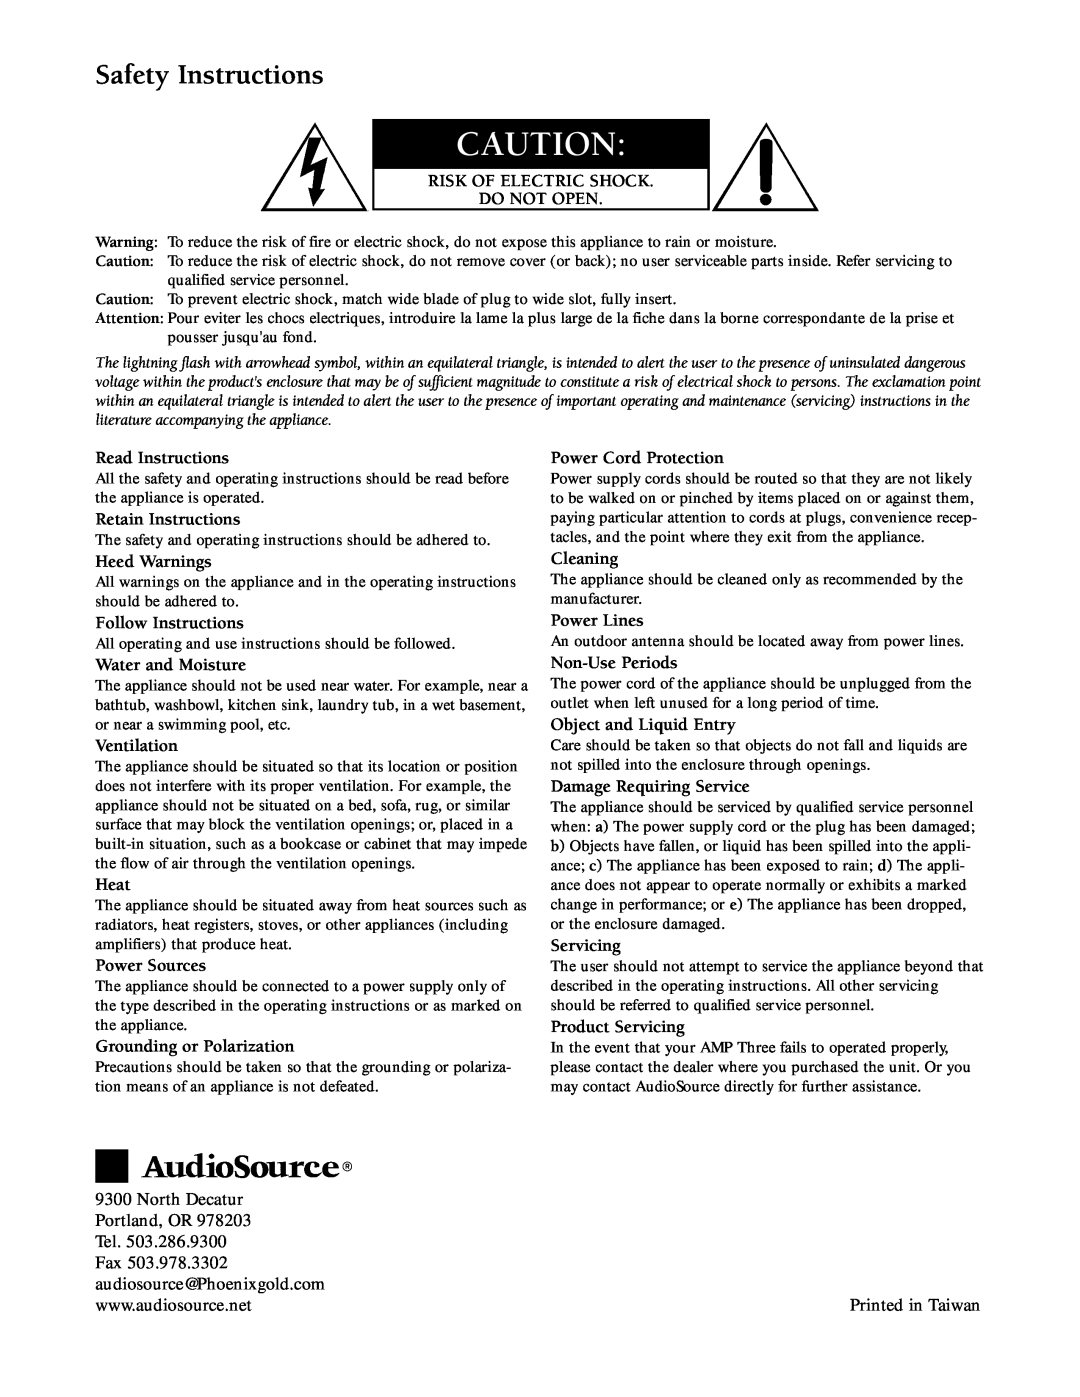 AudioSource AmpThree owner manual Safety Instructions 